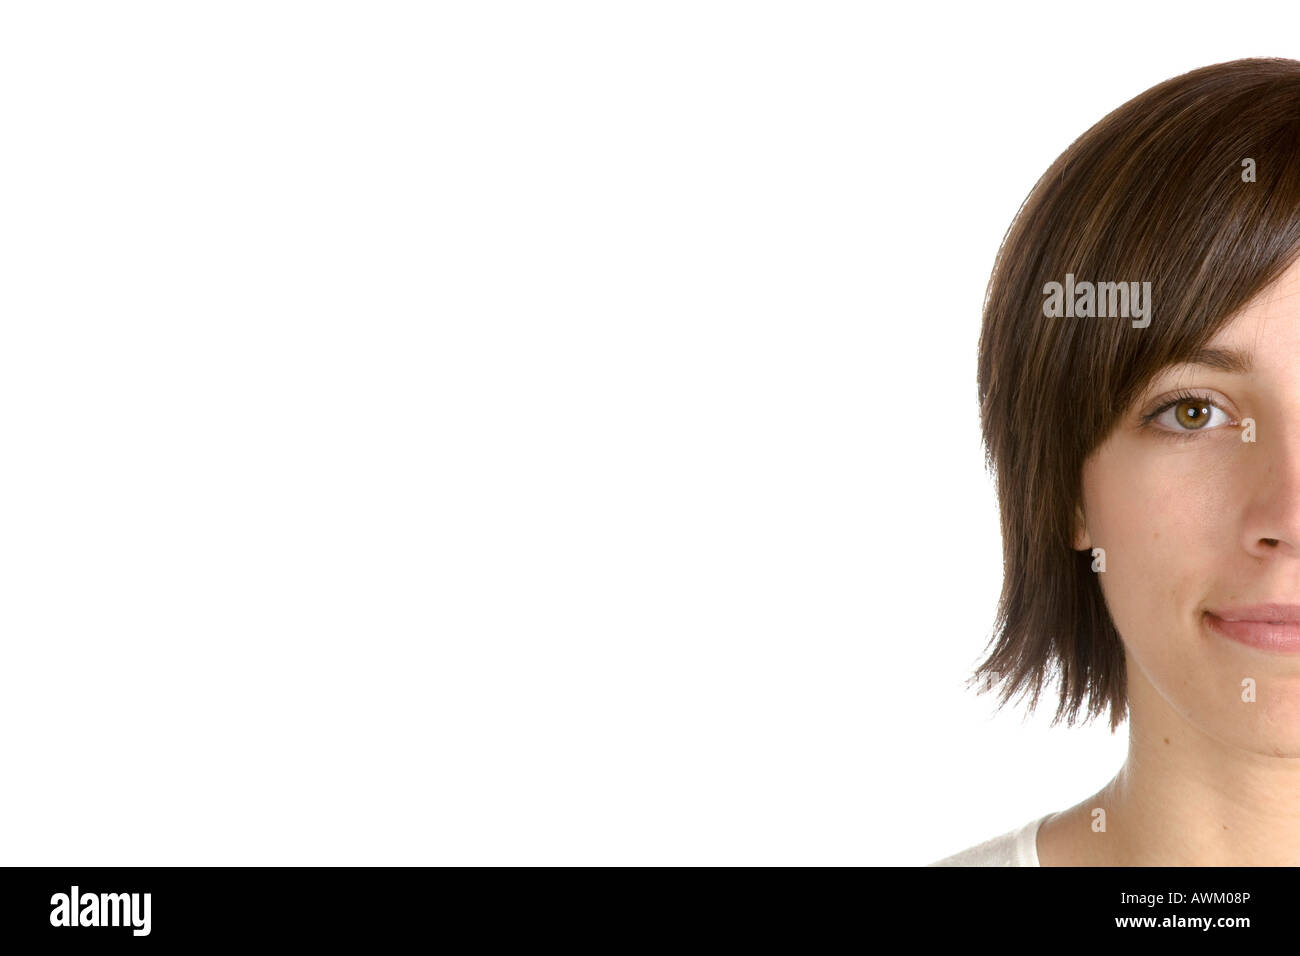 Half portrait of a young woman Stock Photo